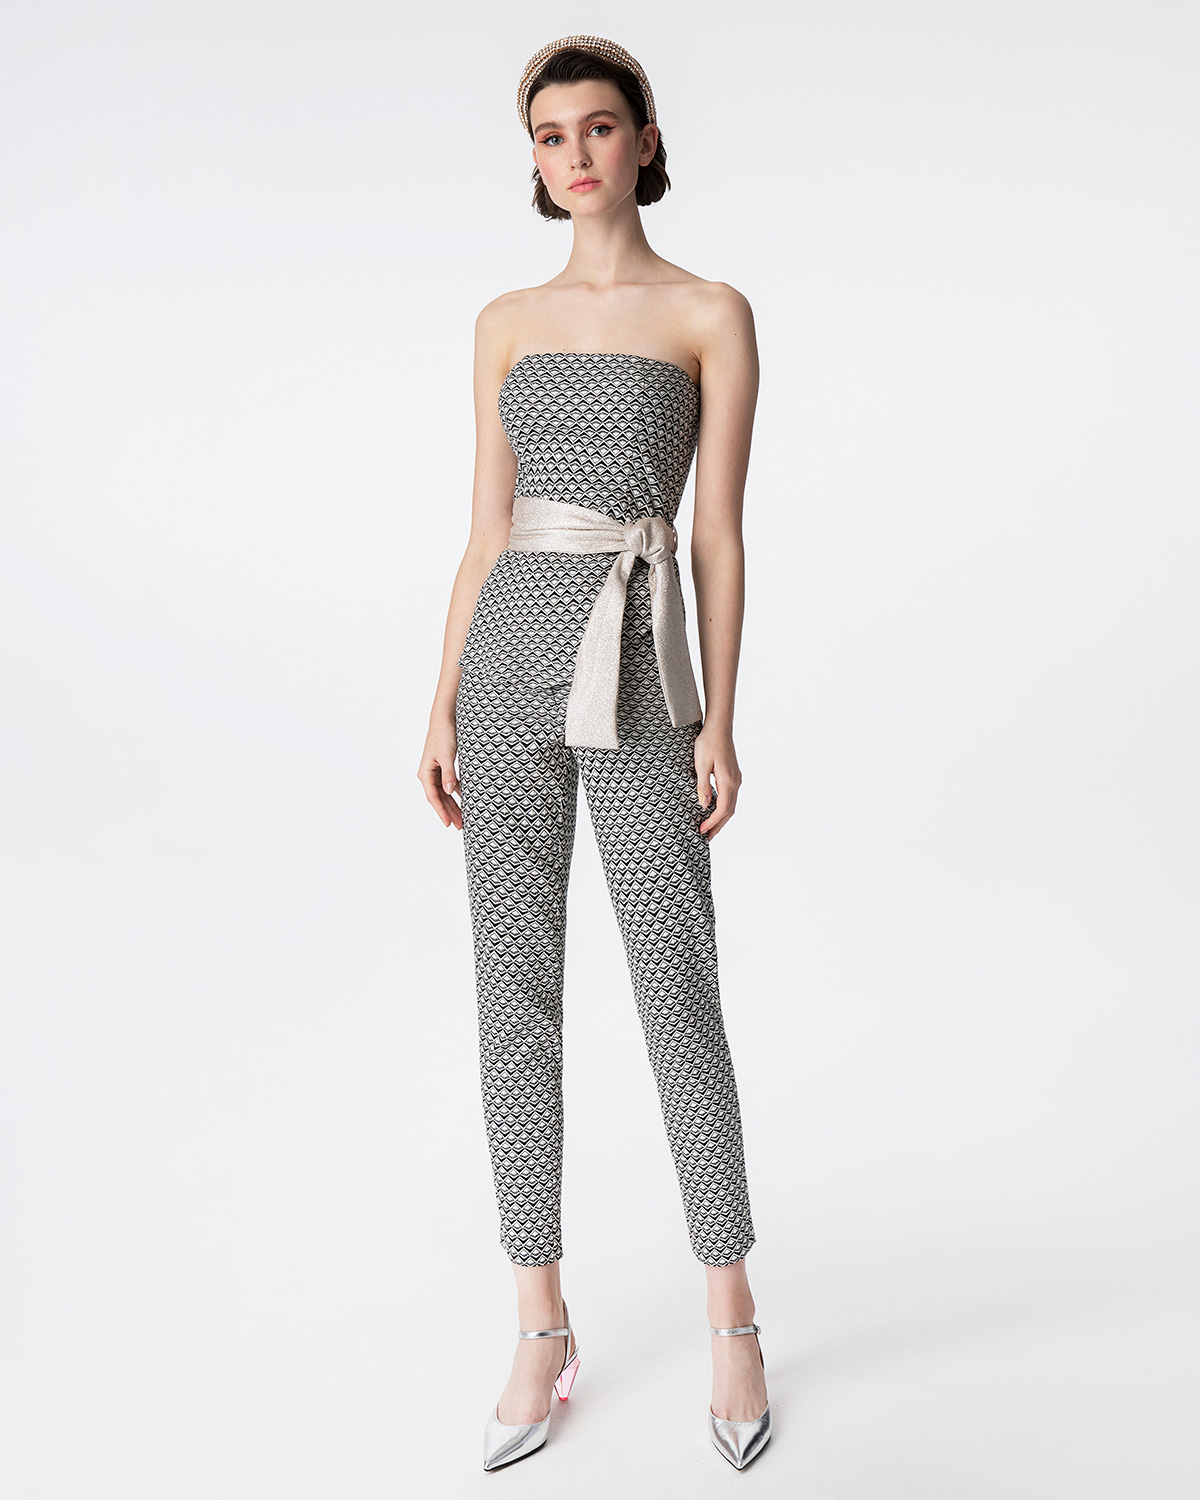 Cocktail Dresses / Printed trouser with top